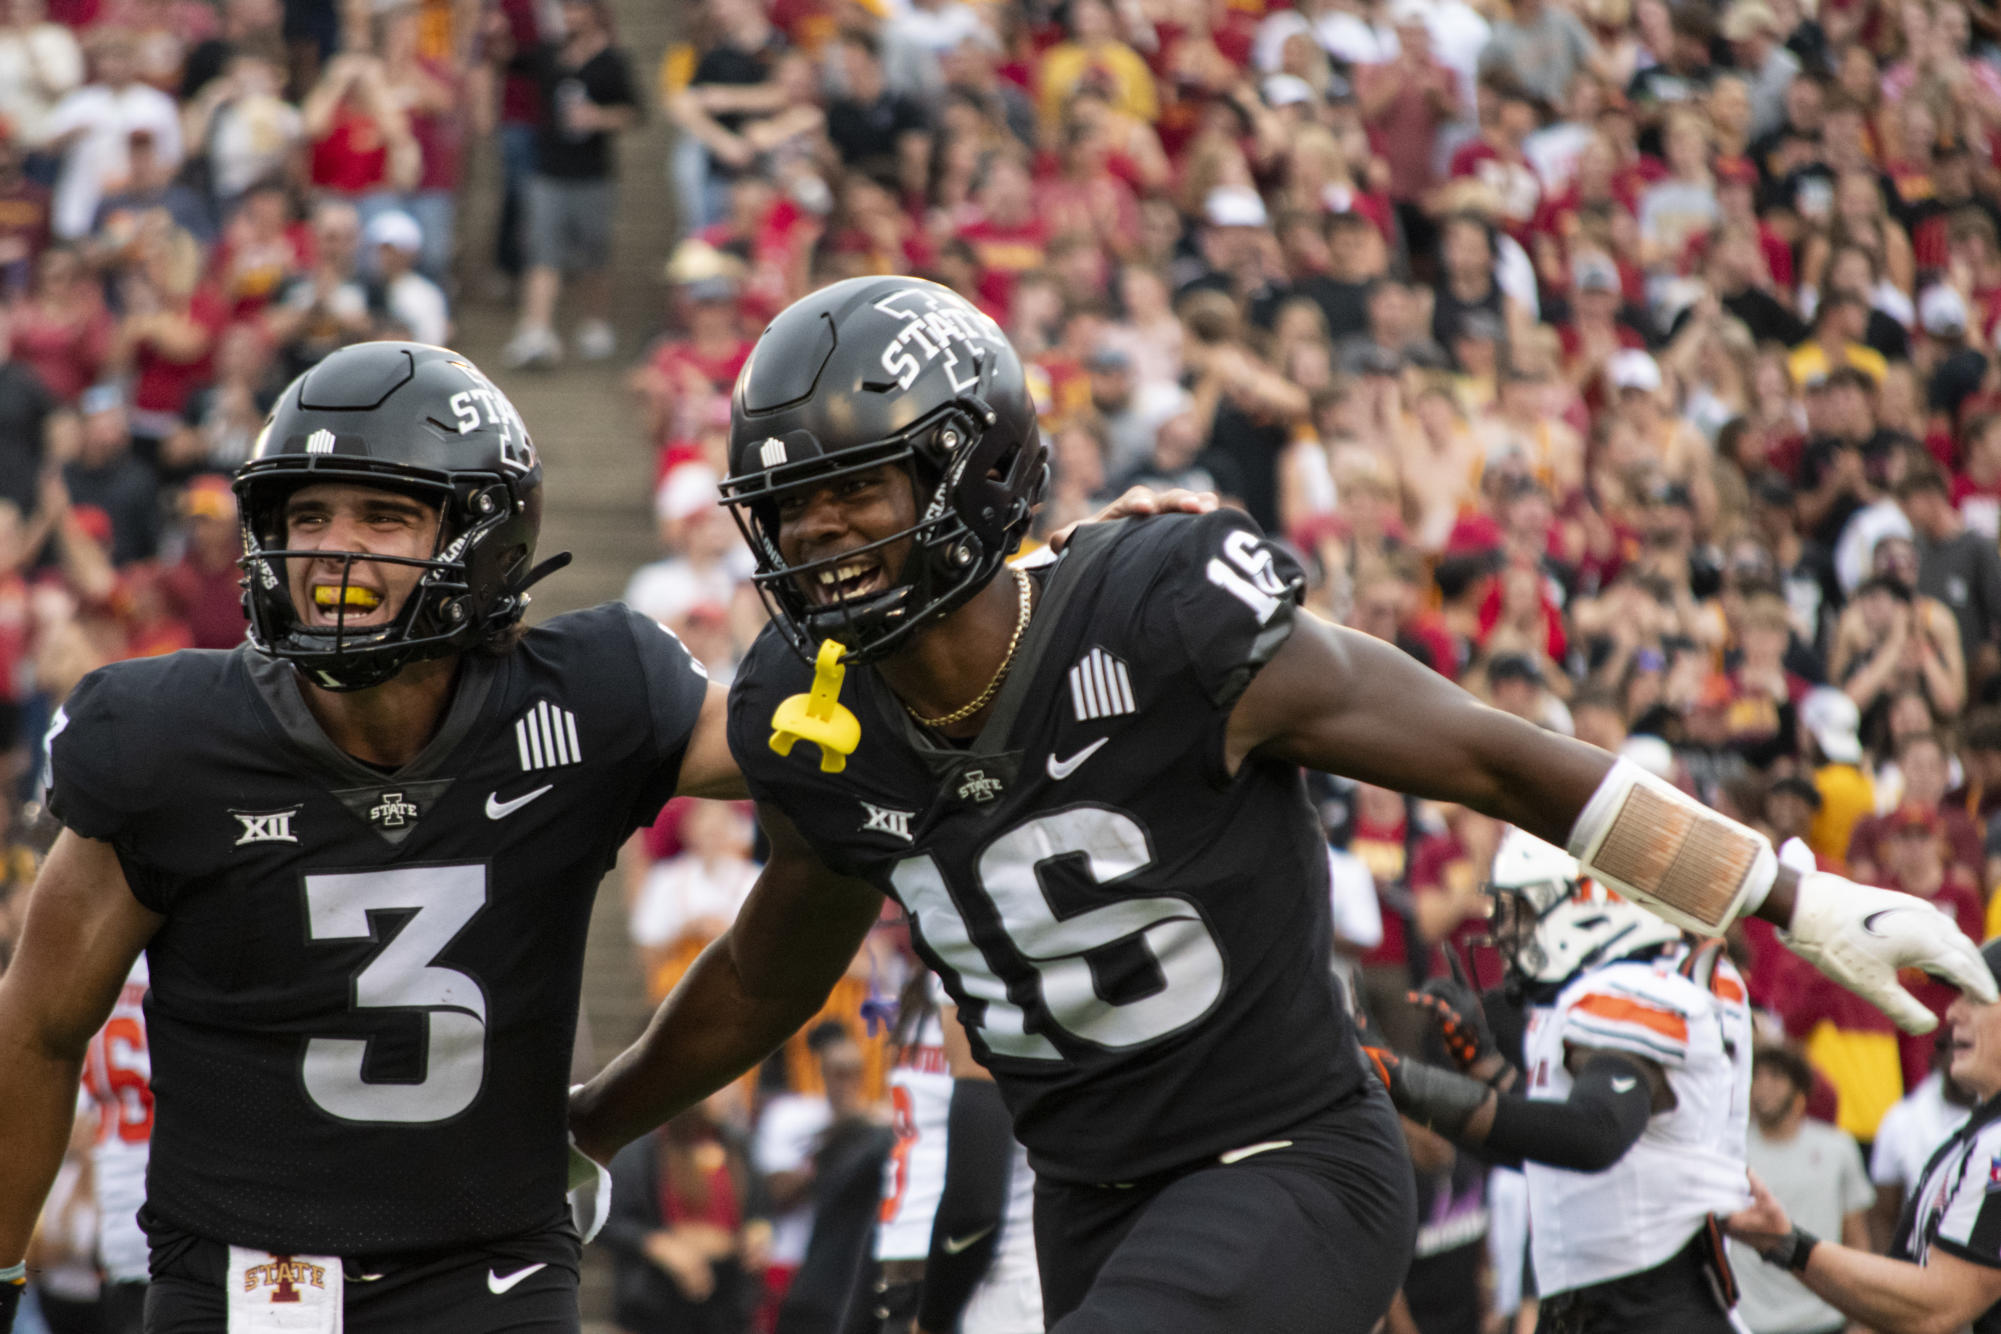 Iowa State’s Daniel Jackson (16) celebrates with Rocco Becht (3) after scoring a touchdown during the first half of the football game against Oklahoma State on Saturday, Sept. 23, 2023, at Jack Trice Stadium in Ames, Iowa.